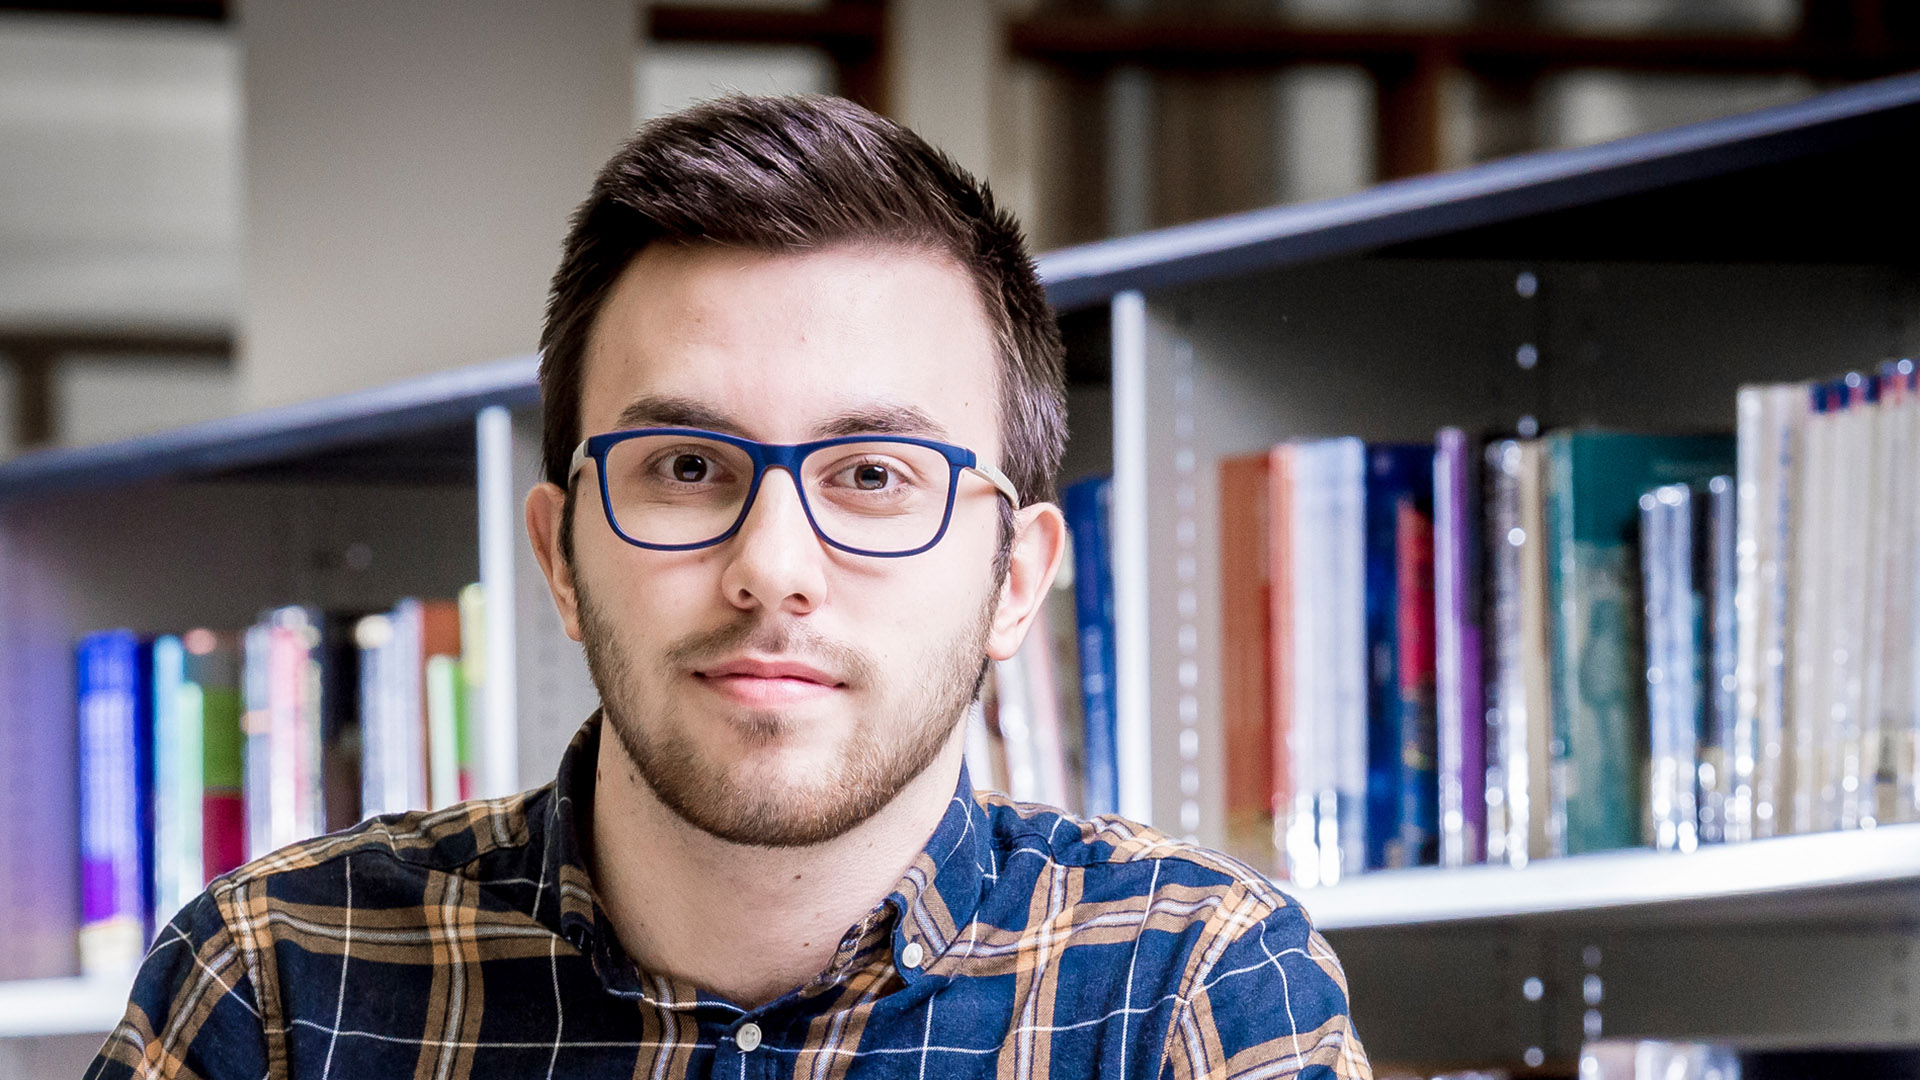 Male student sat in front of a shelf of books